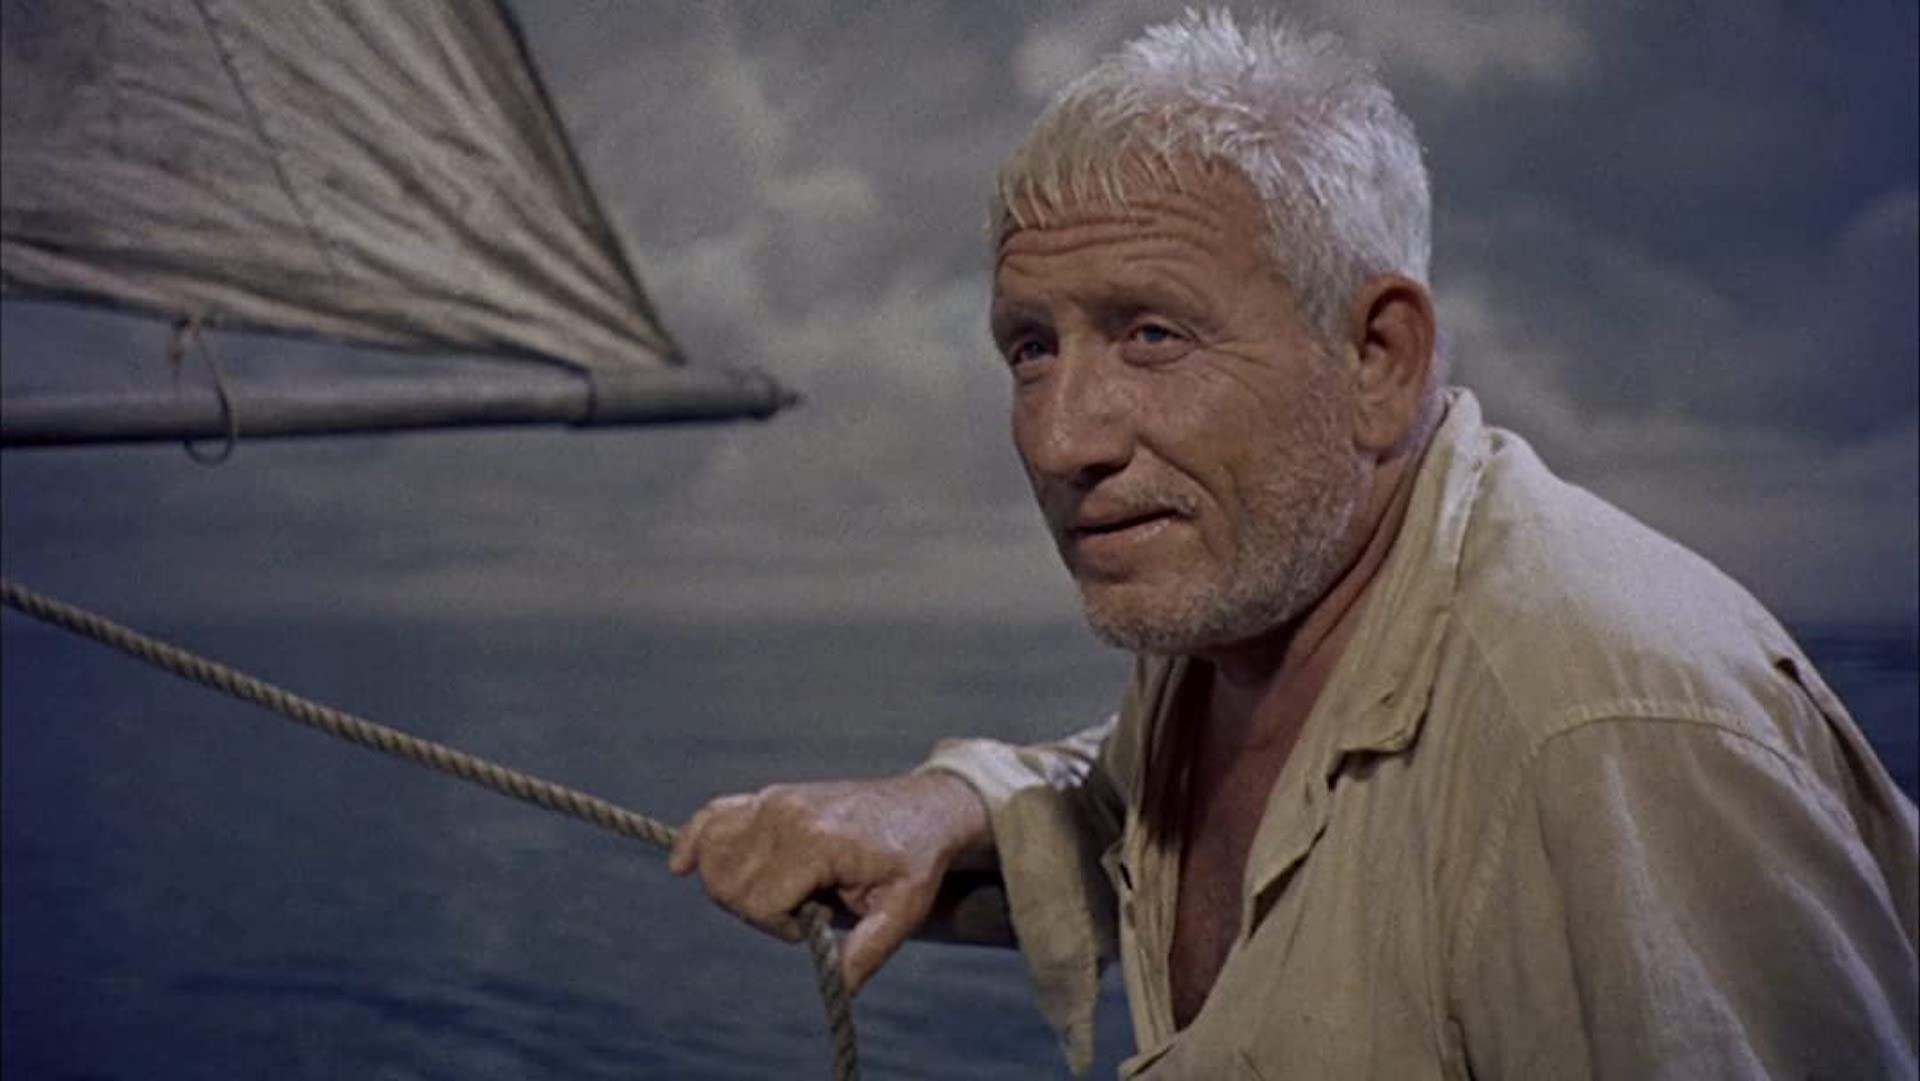 The Old Man (Spencer Tracy) on a boat in 'The Old Man and the Sea' (1958)